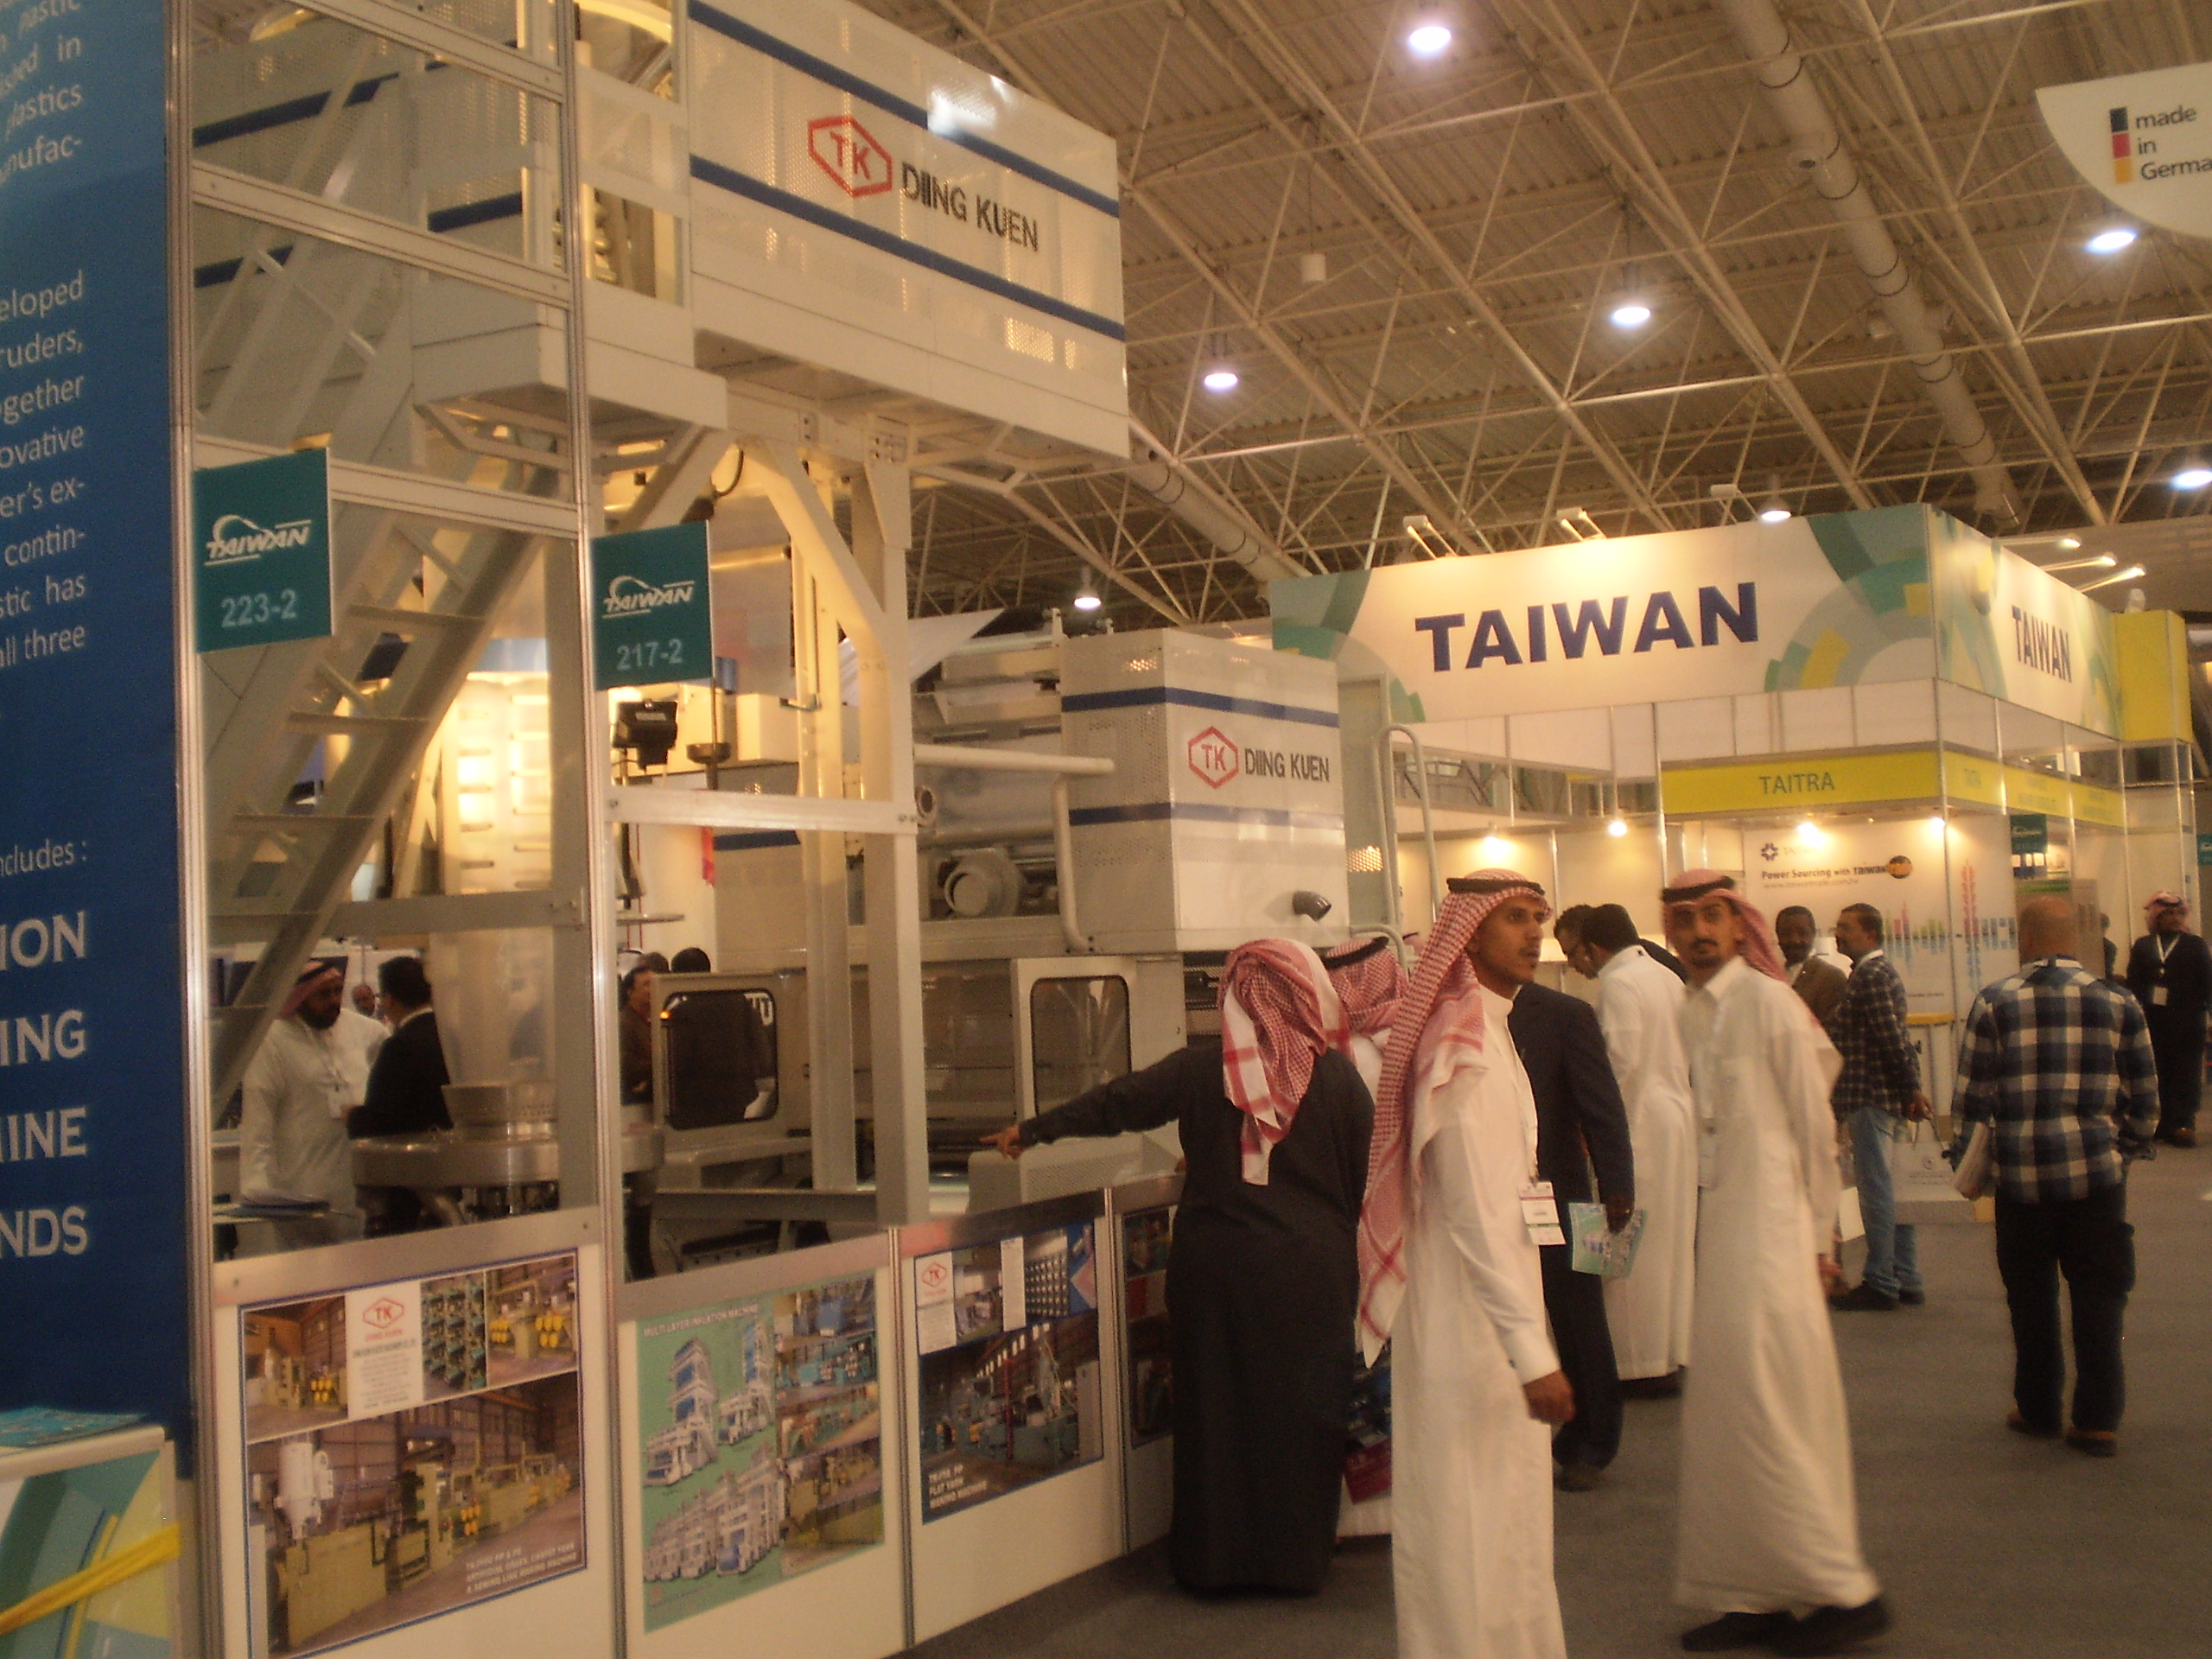 The Taiwan Pavilion (organized by TAITRA) was located in Hall 2.